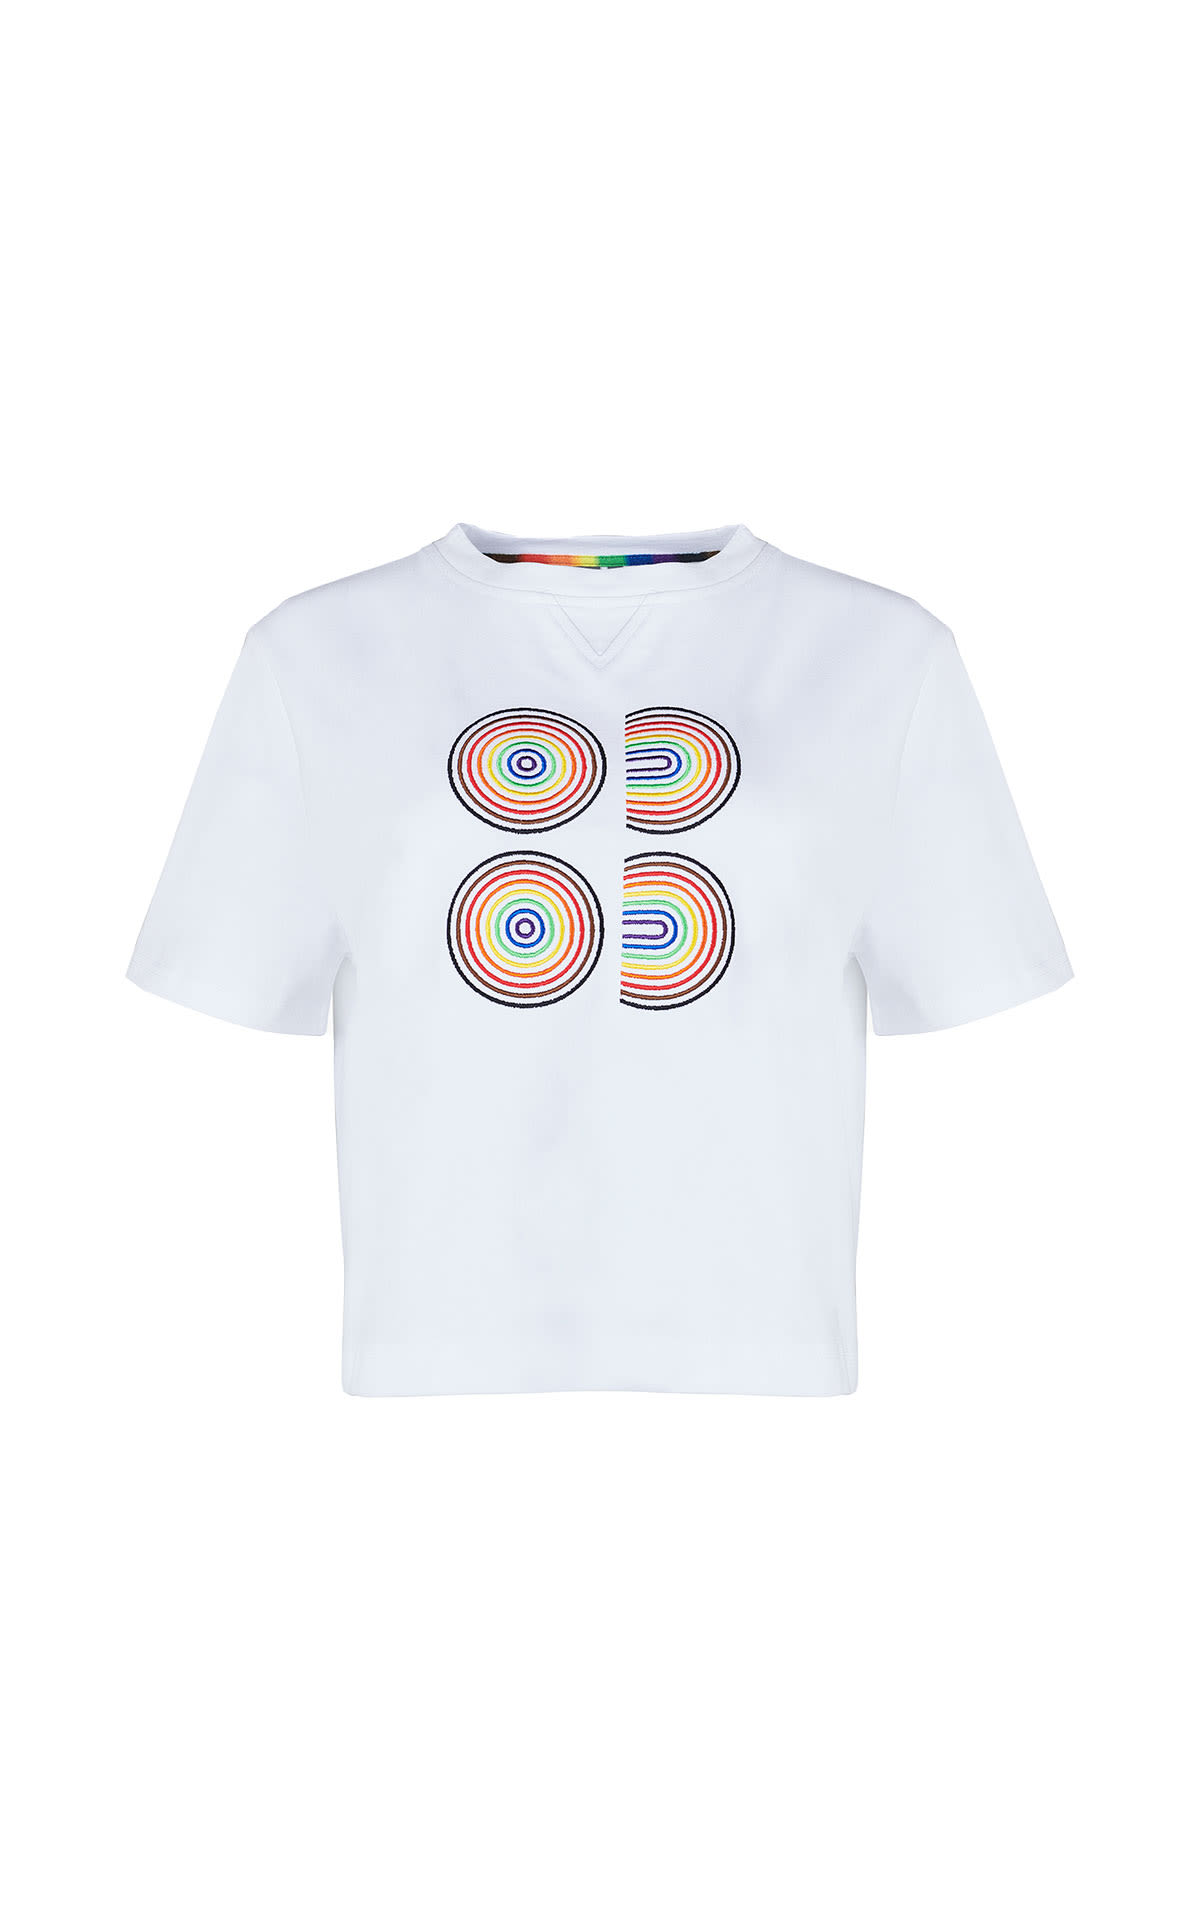 Sweaty Betty Pride t-shirt white from Bicester Village